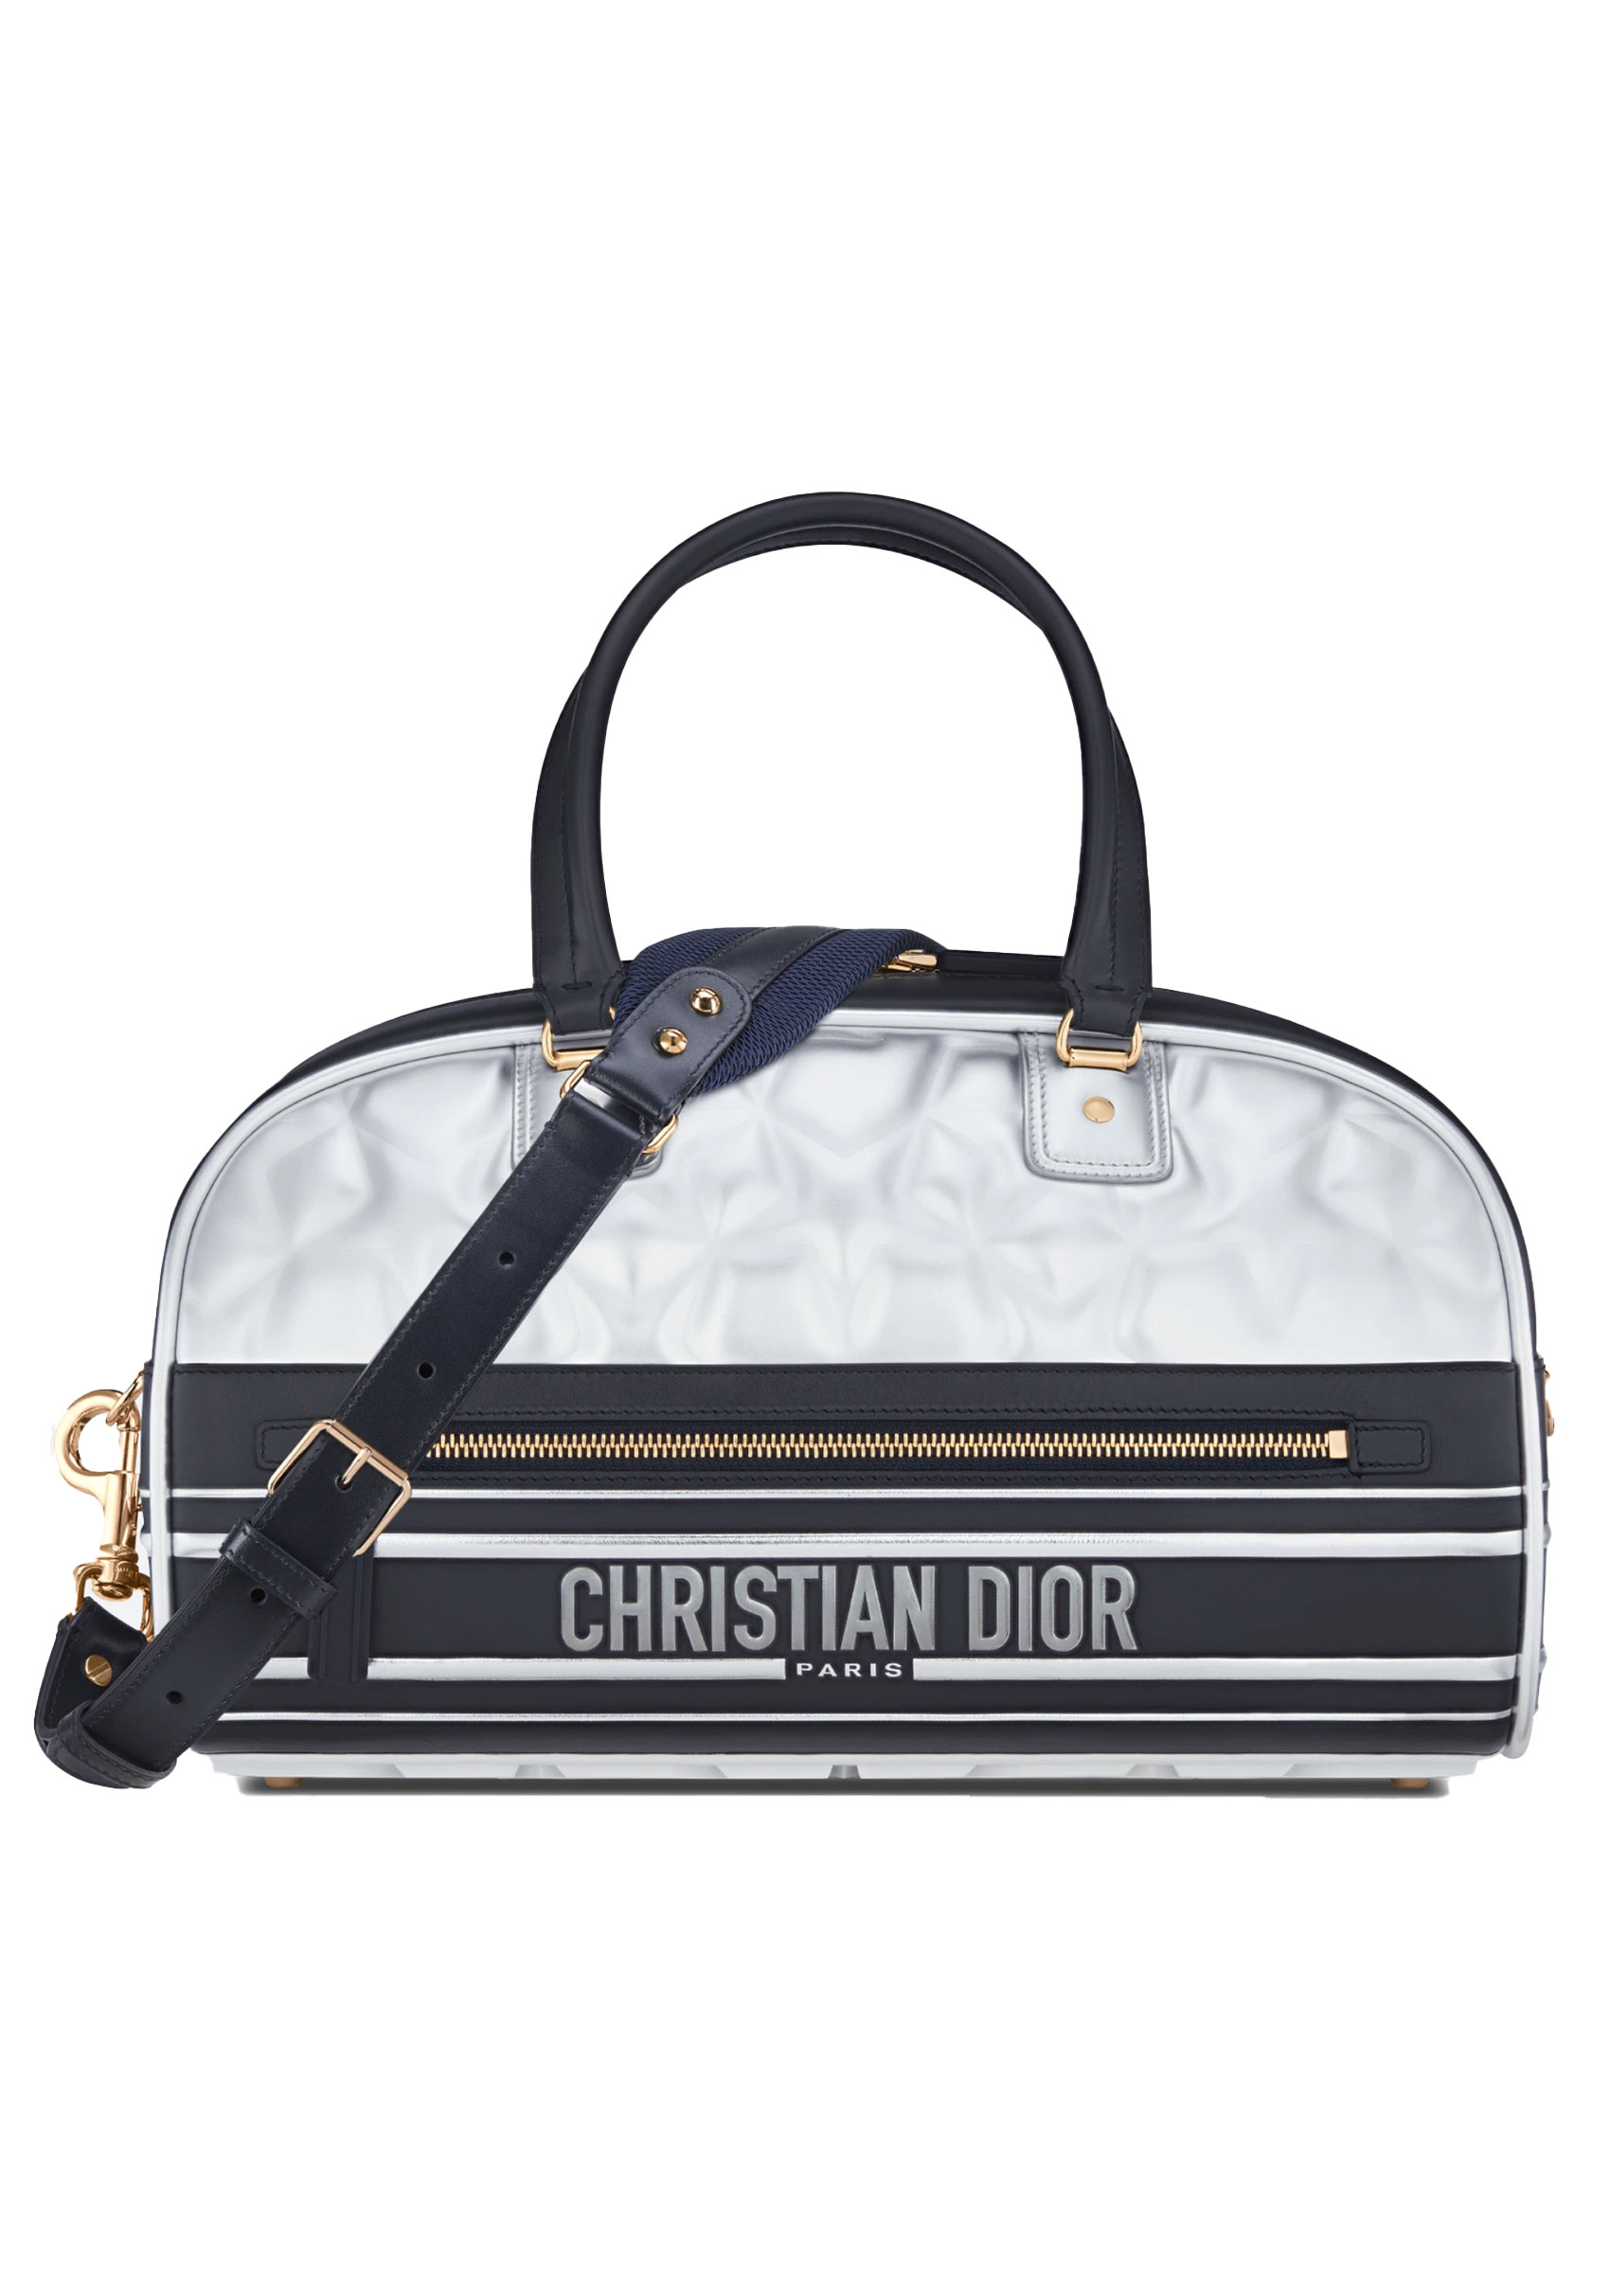 Dior Vibe: All About The Hottest 2022 Dior Bag Release » coco bassey